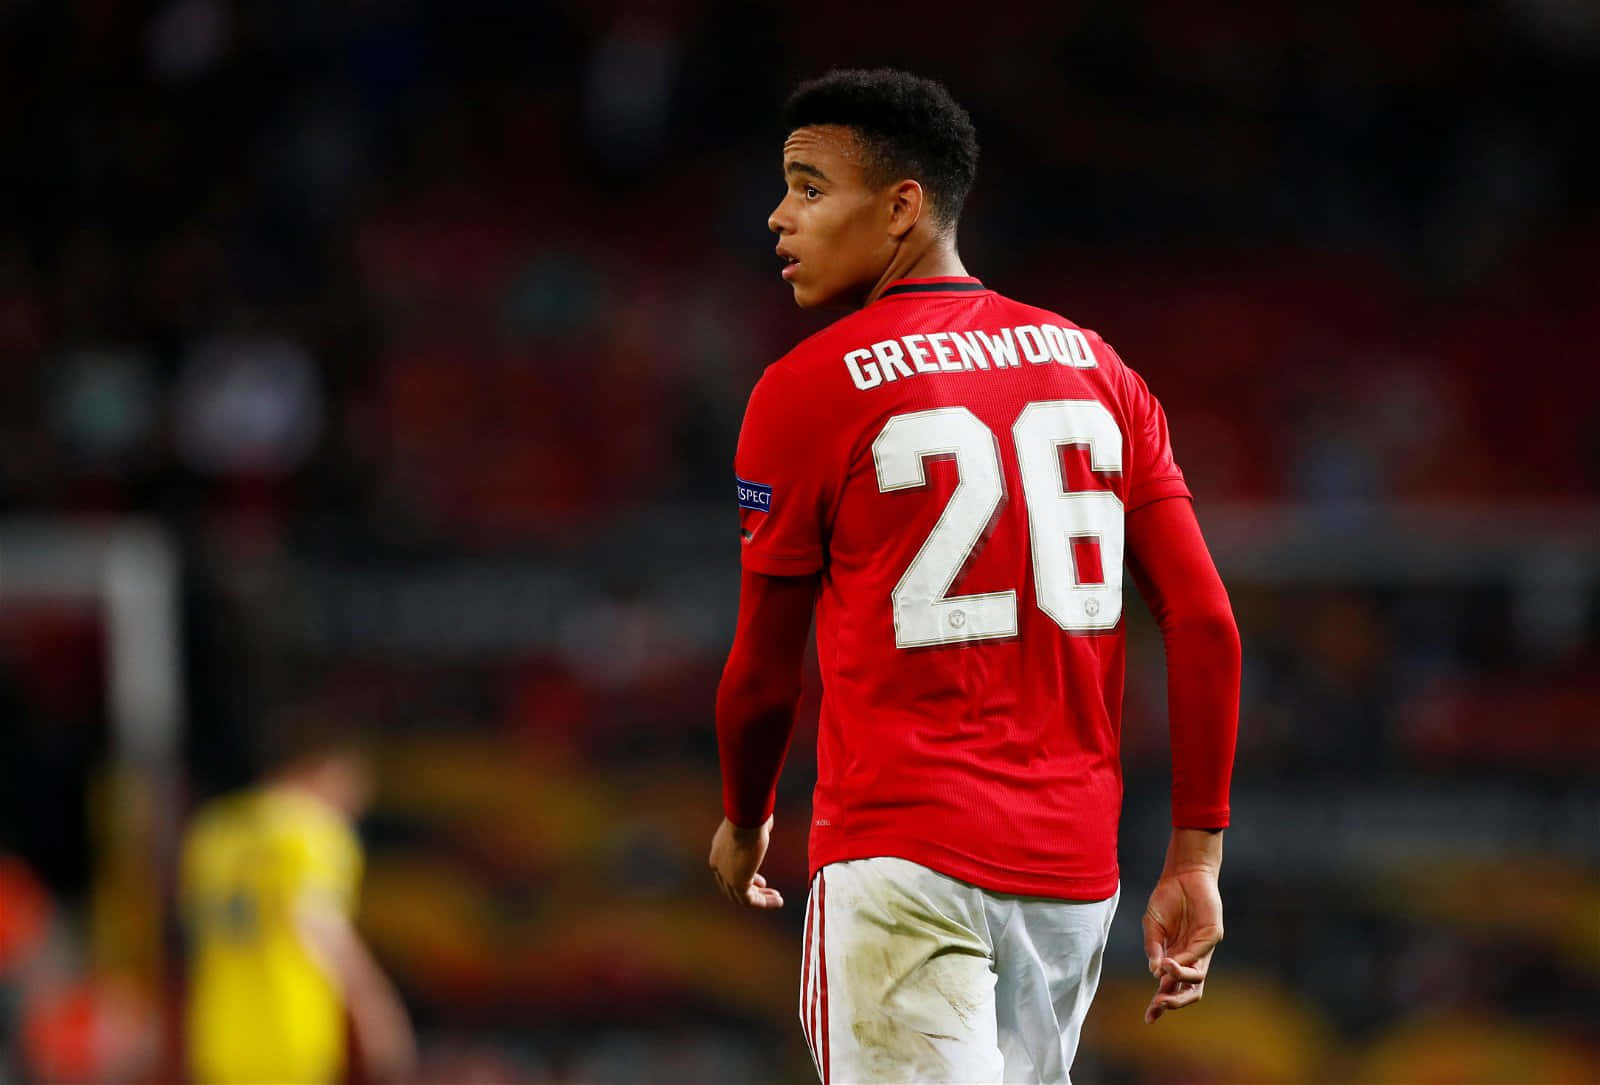 Mason Greenwood in action on the field